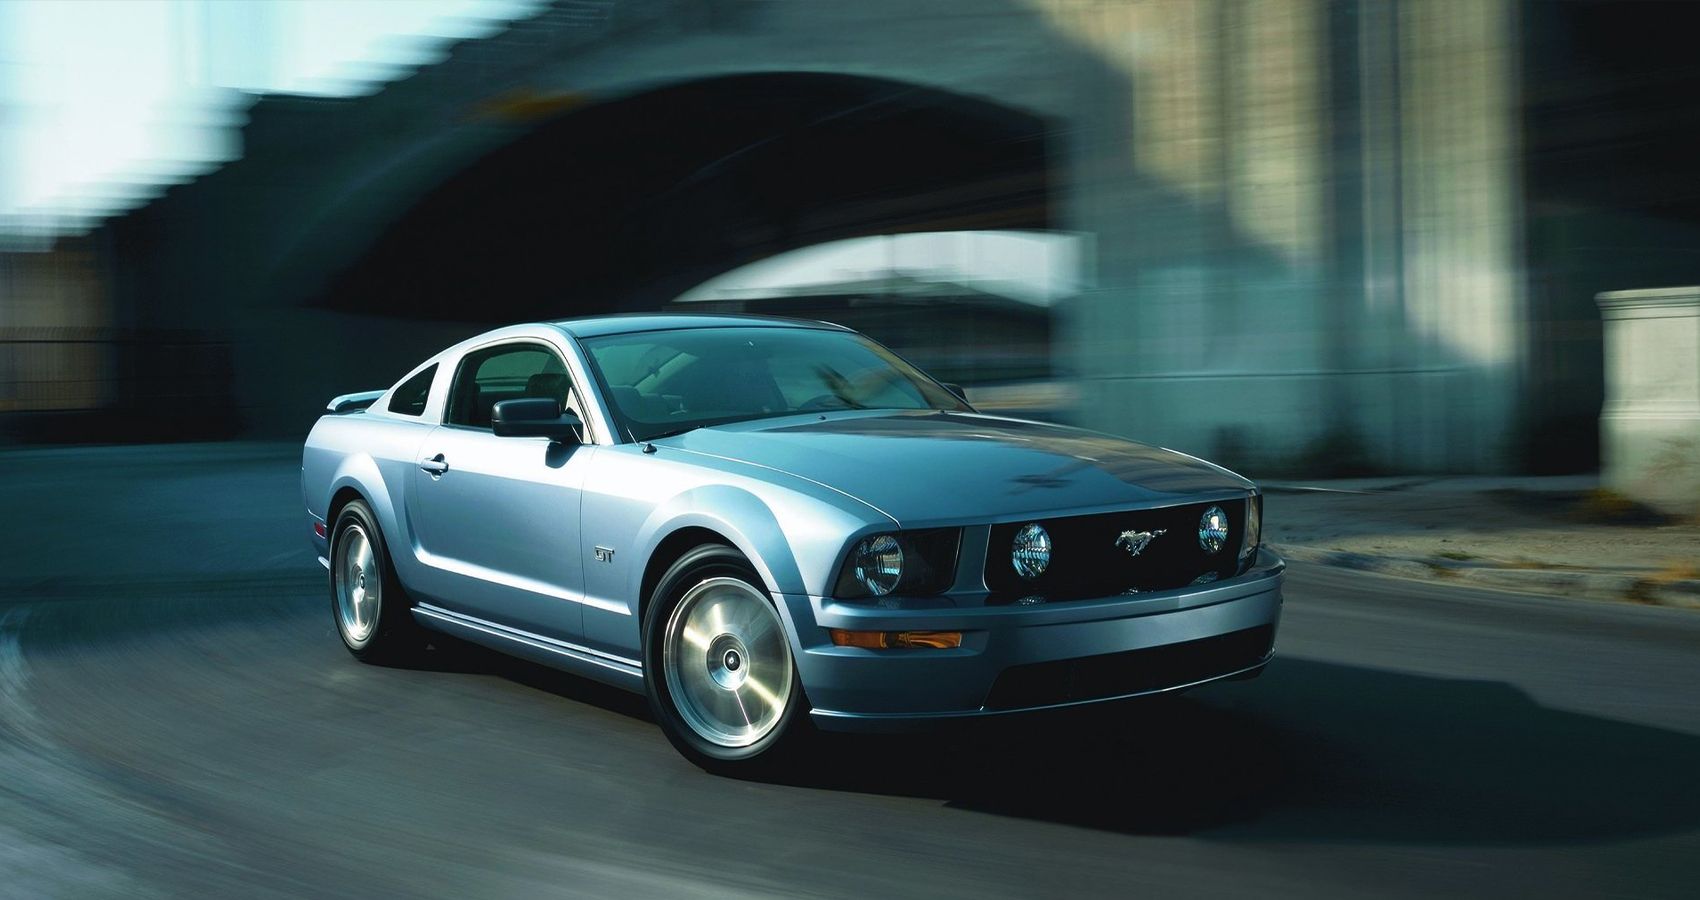 2005 Ford Mustang GT in Silver